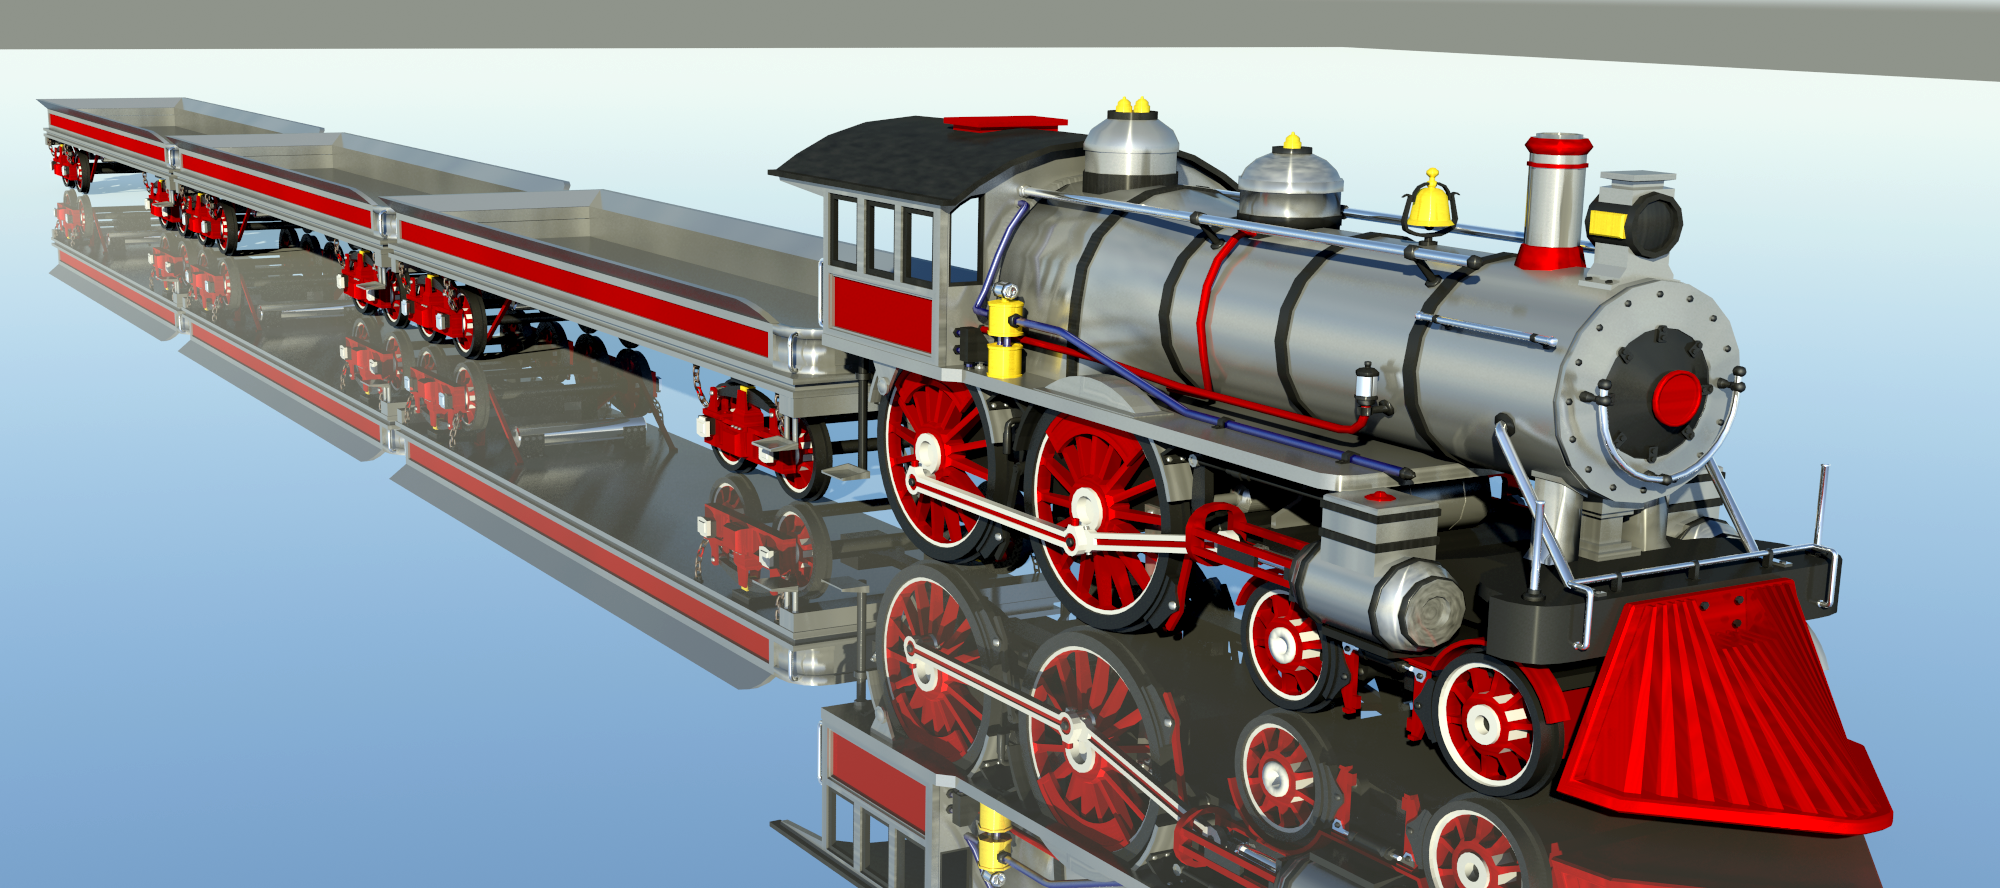 TrainEngine_Final2.png